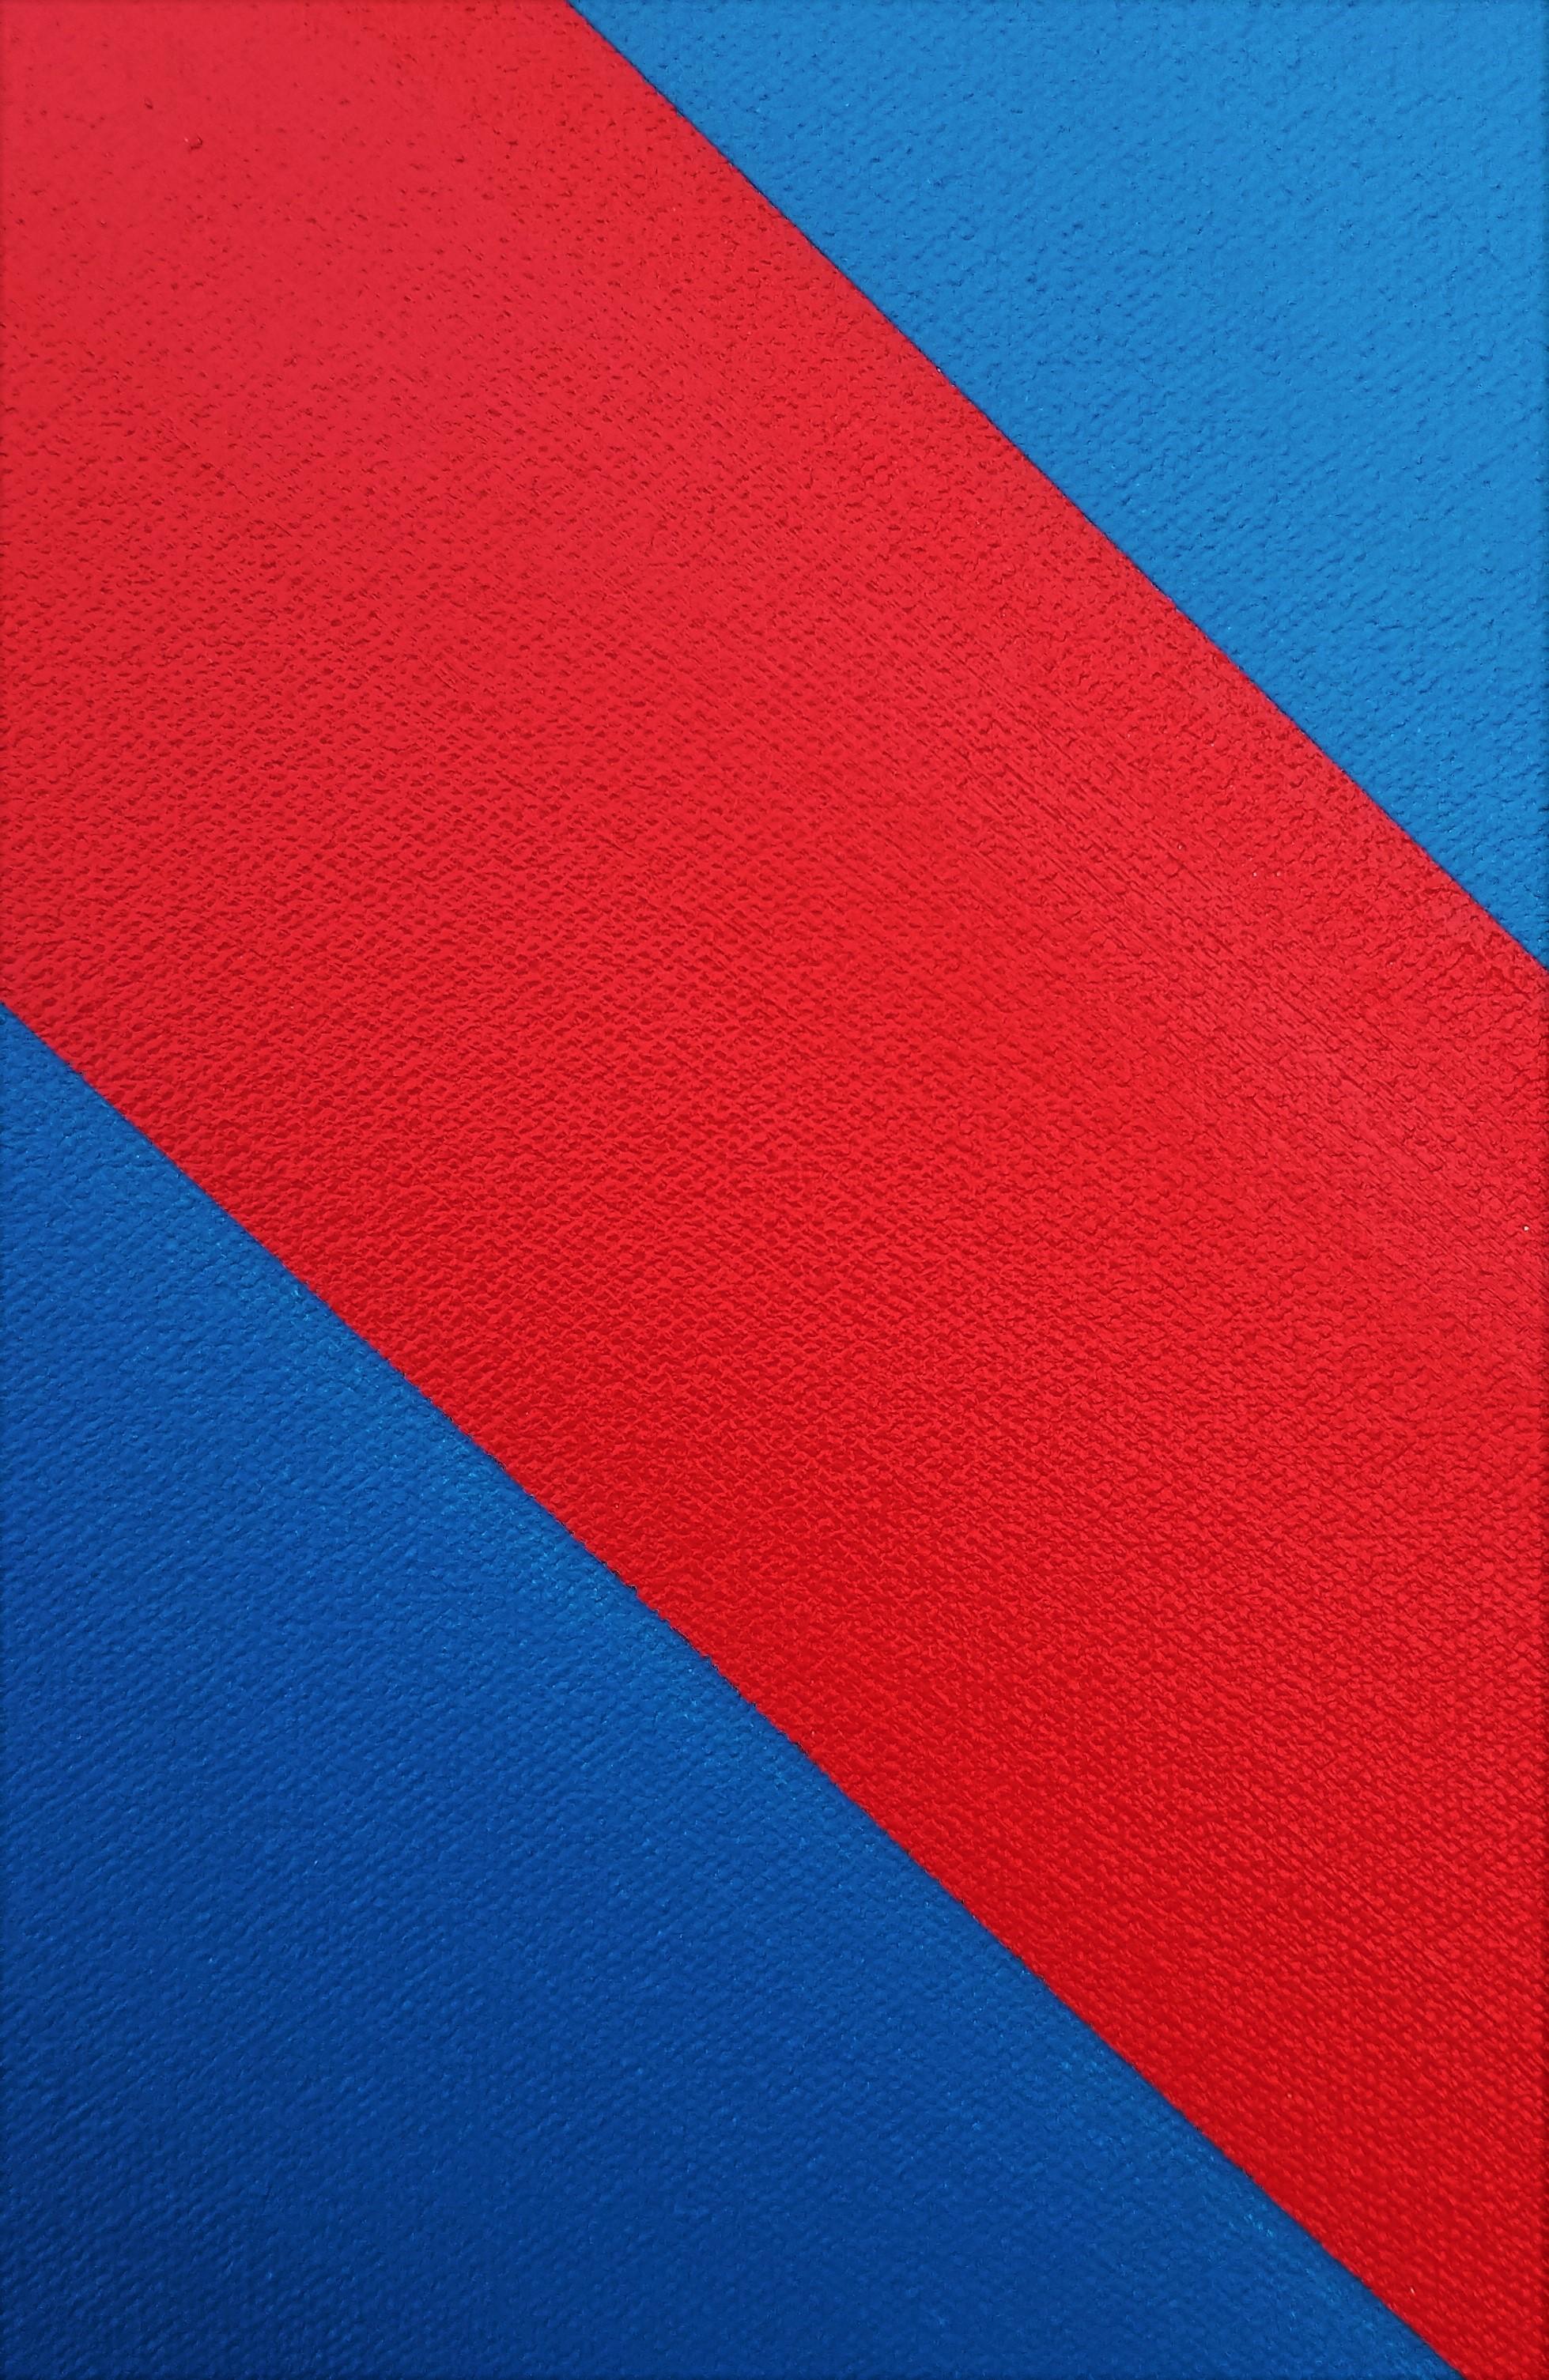 Diamond XLV /// Contemporary Abstract Geometric Striped Blue Red White Painting For Sale 9